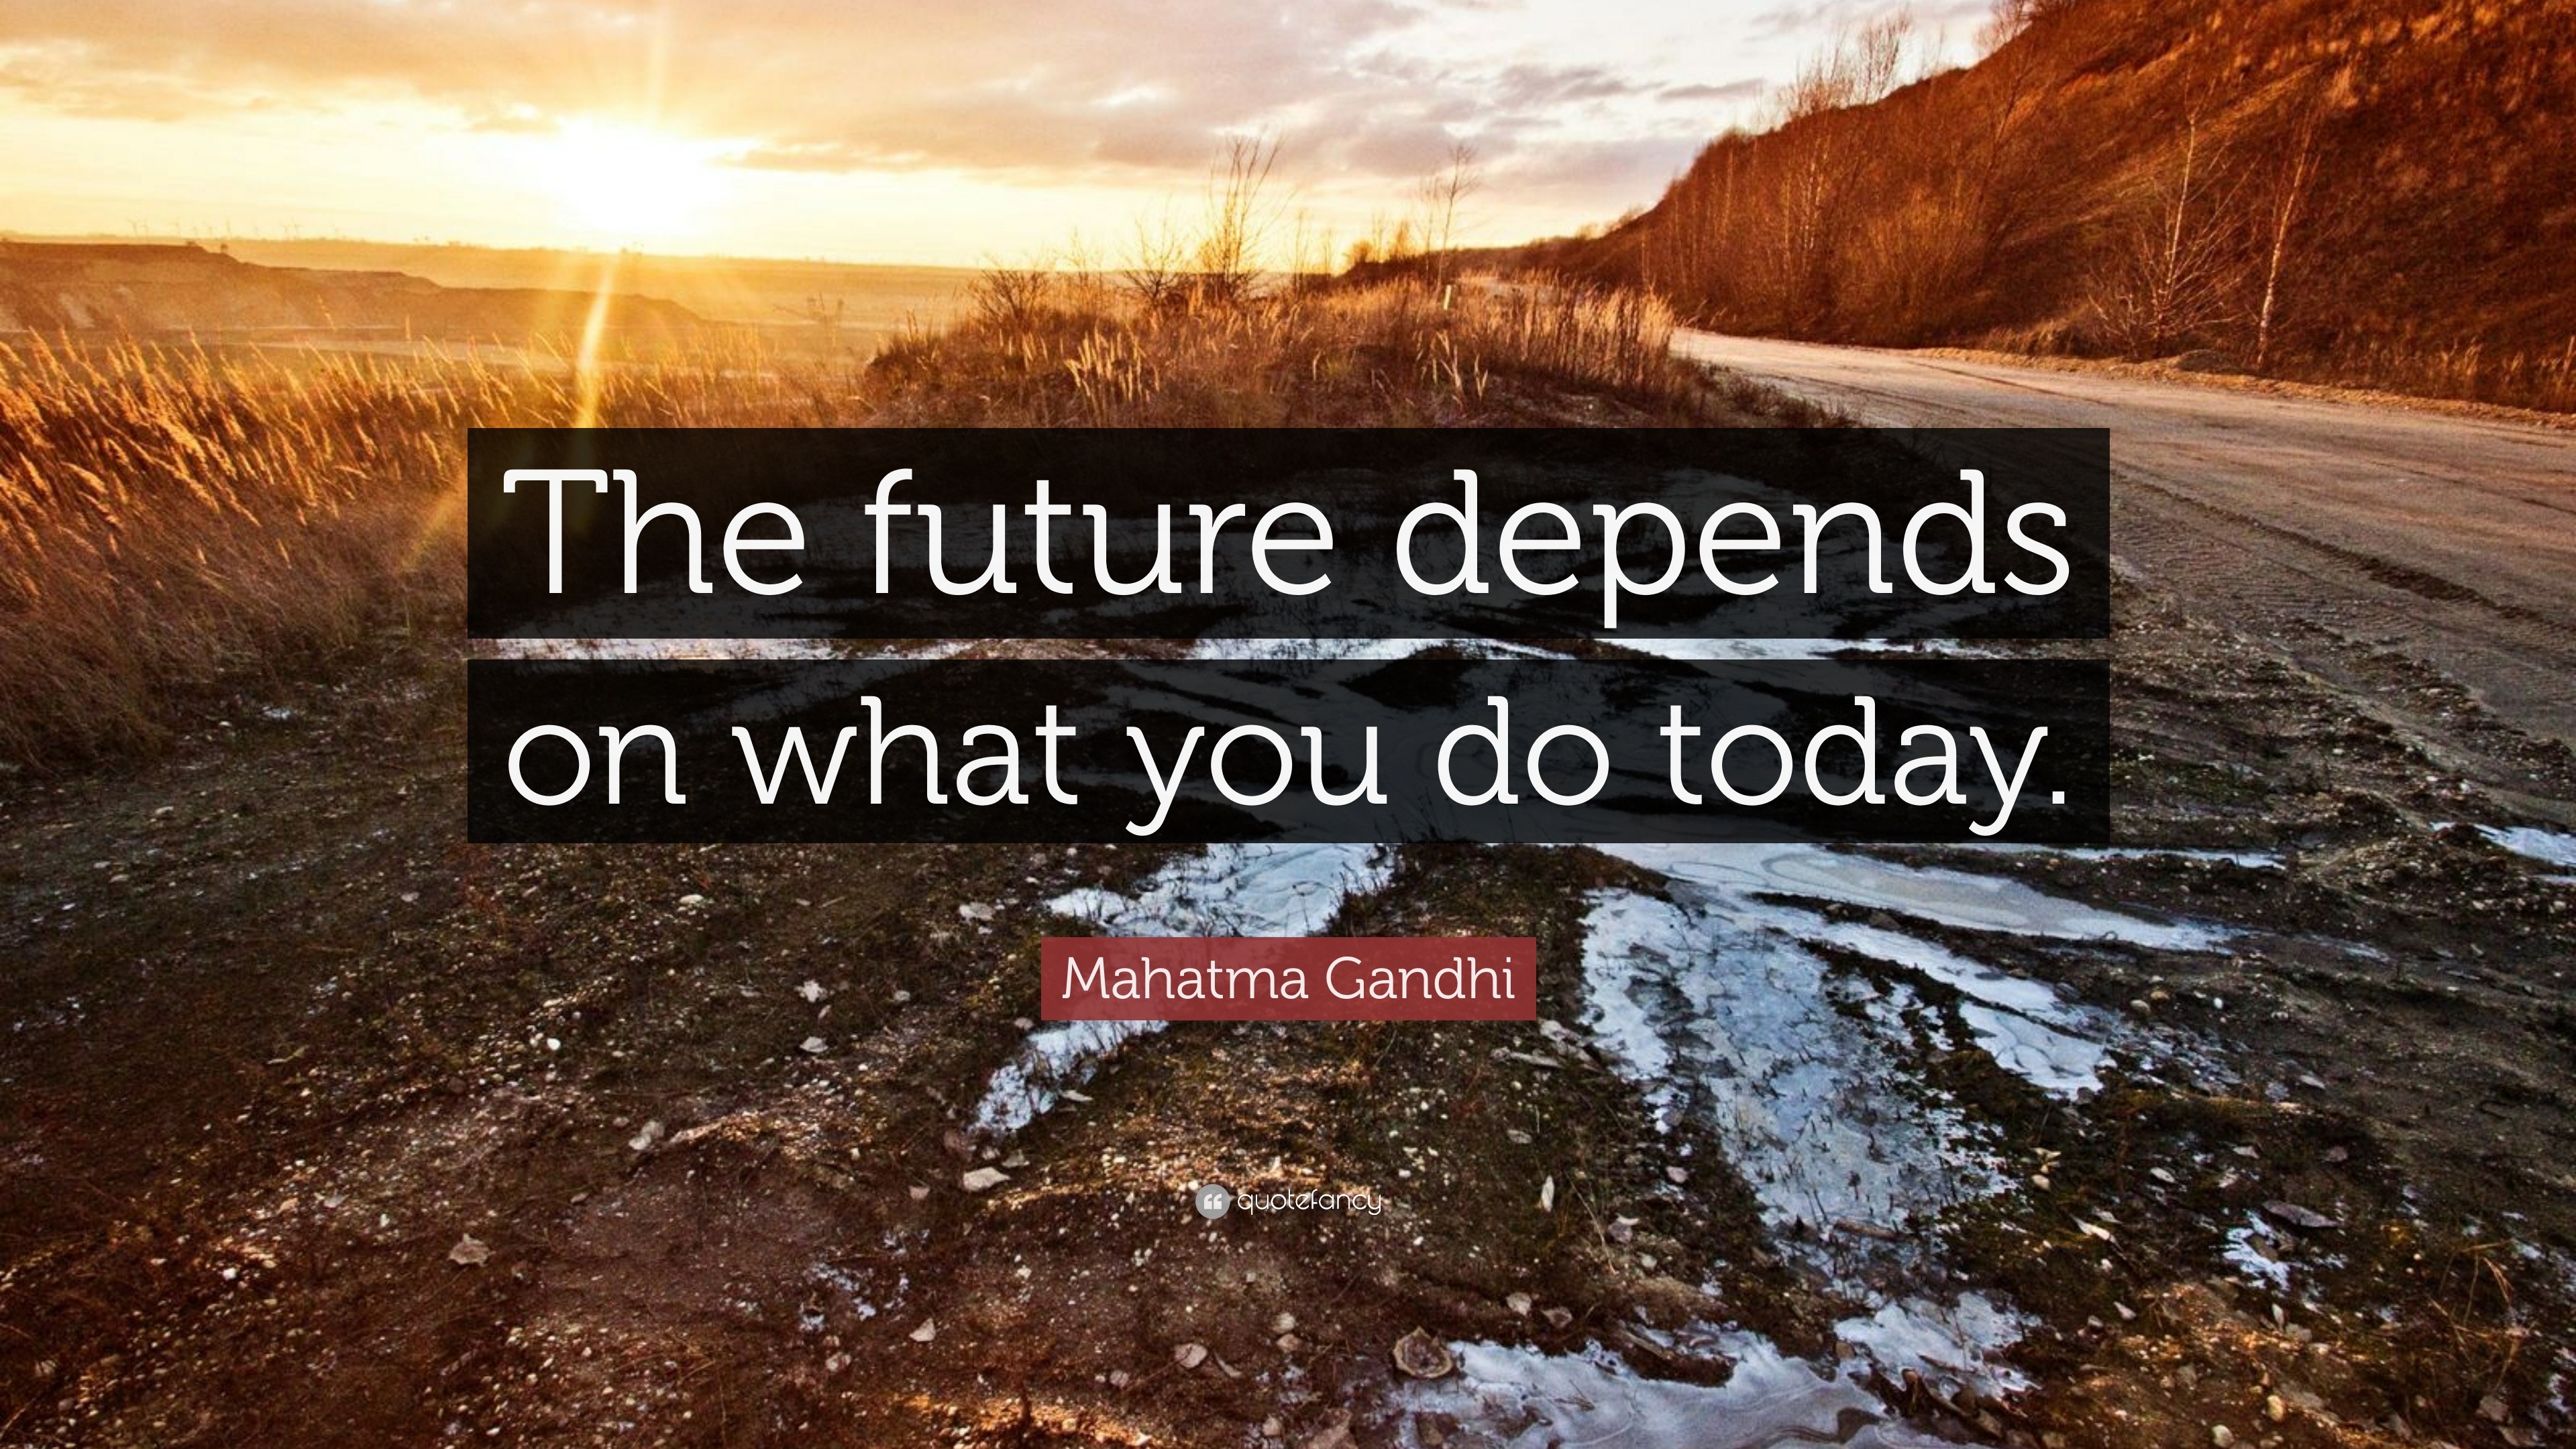 Mahatma Gandhi Quote: “The future depends on what you do today.”